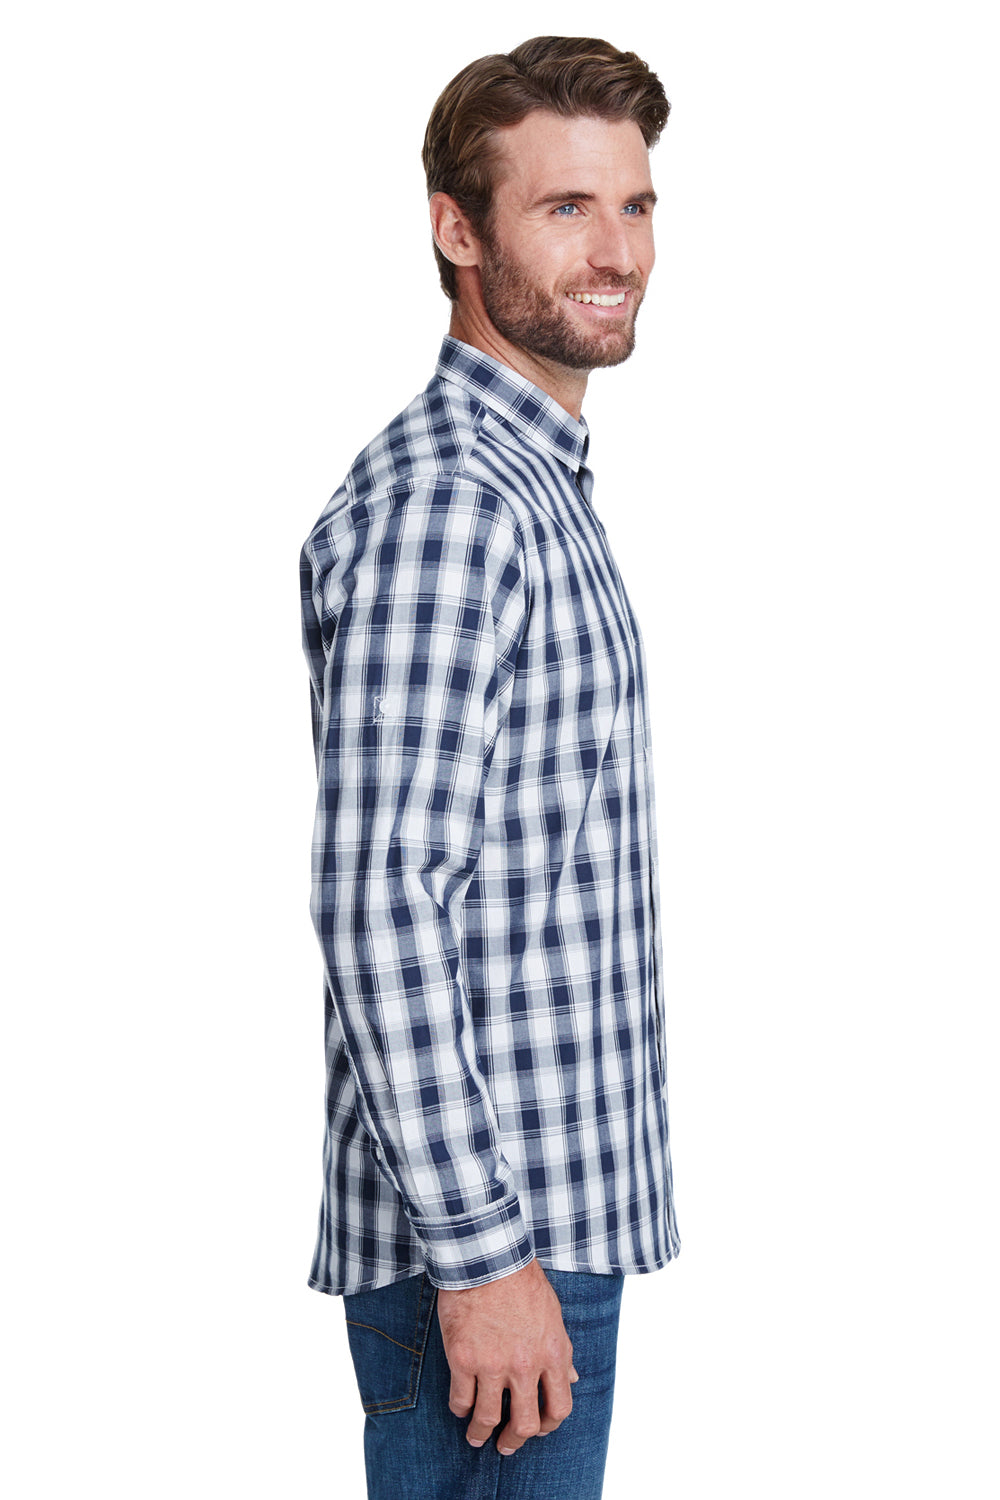 Artisan Collection RP250 Mens Mulligan Check Long Sleeve Button Down Shirt White/Navy Blue Model Side